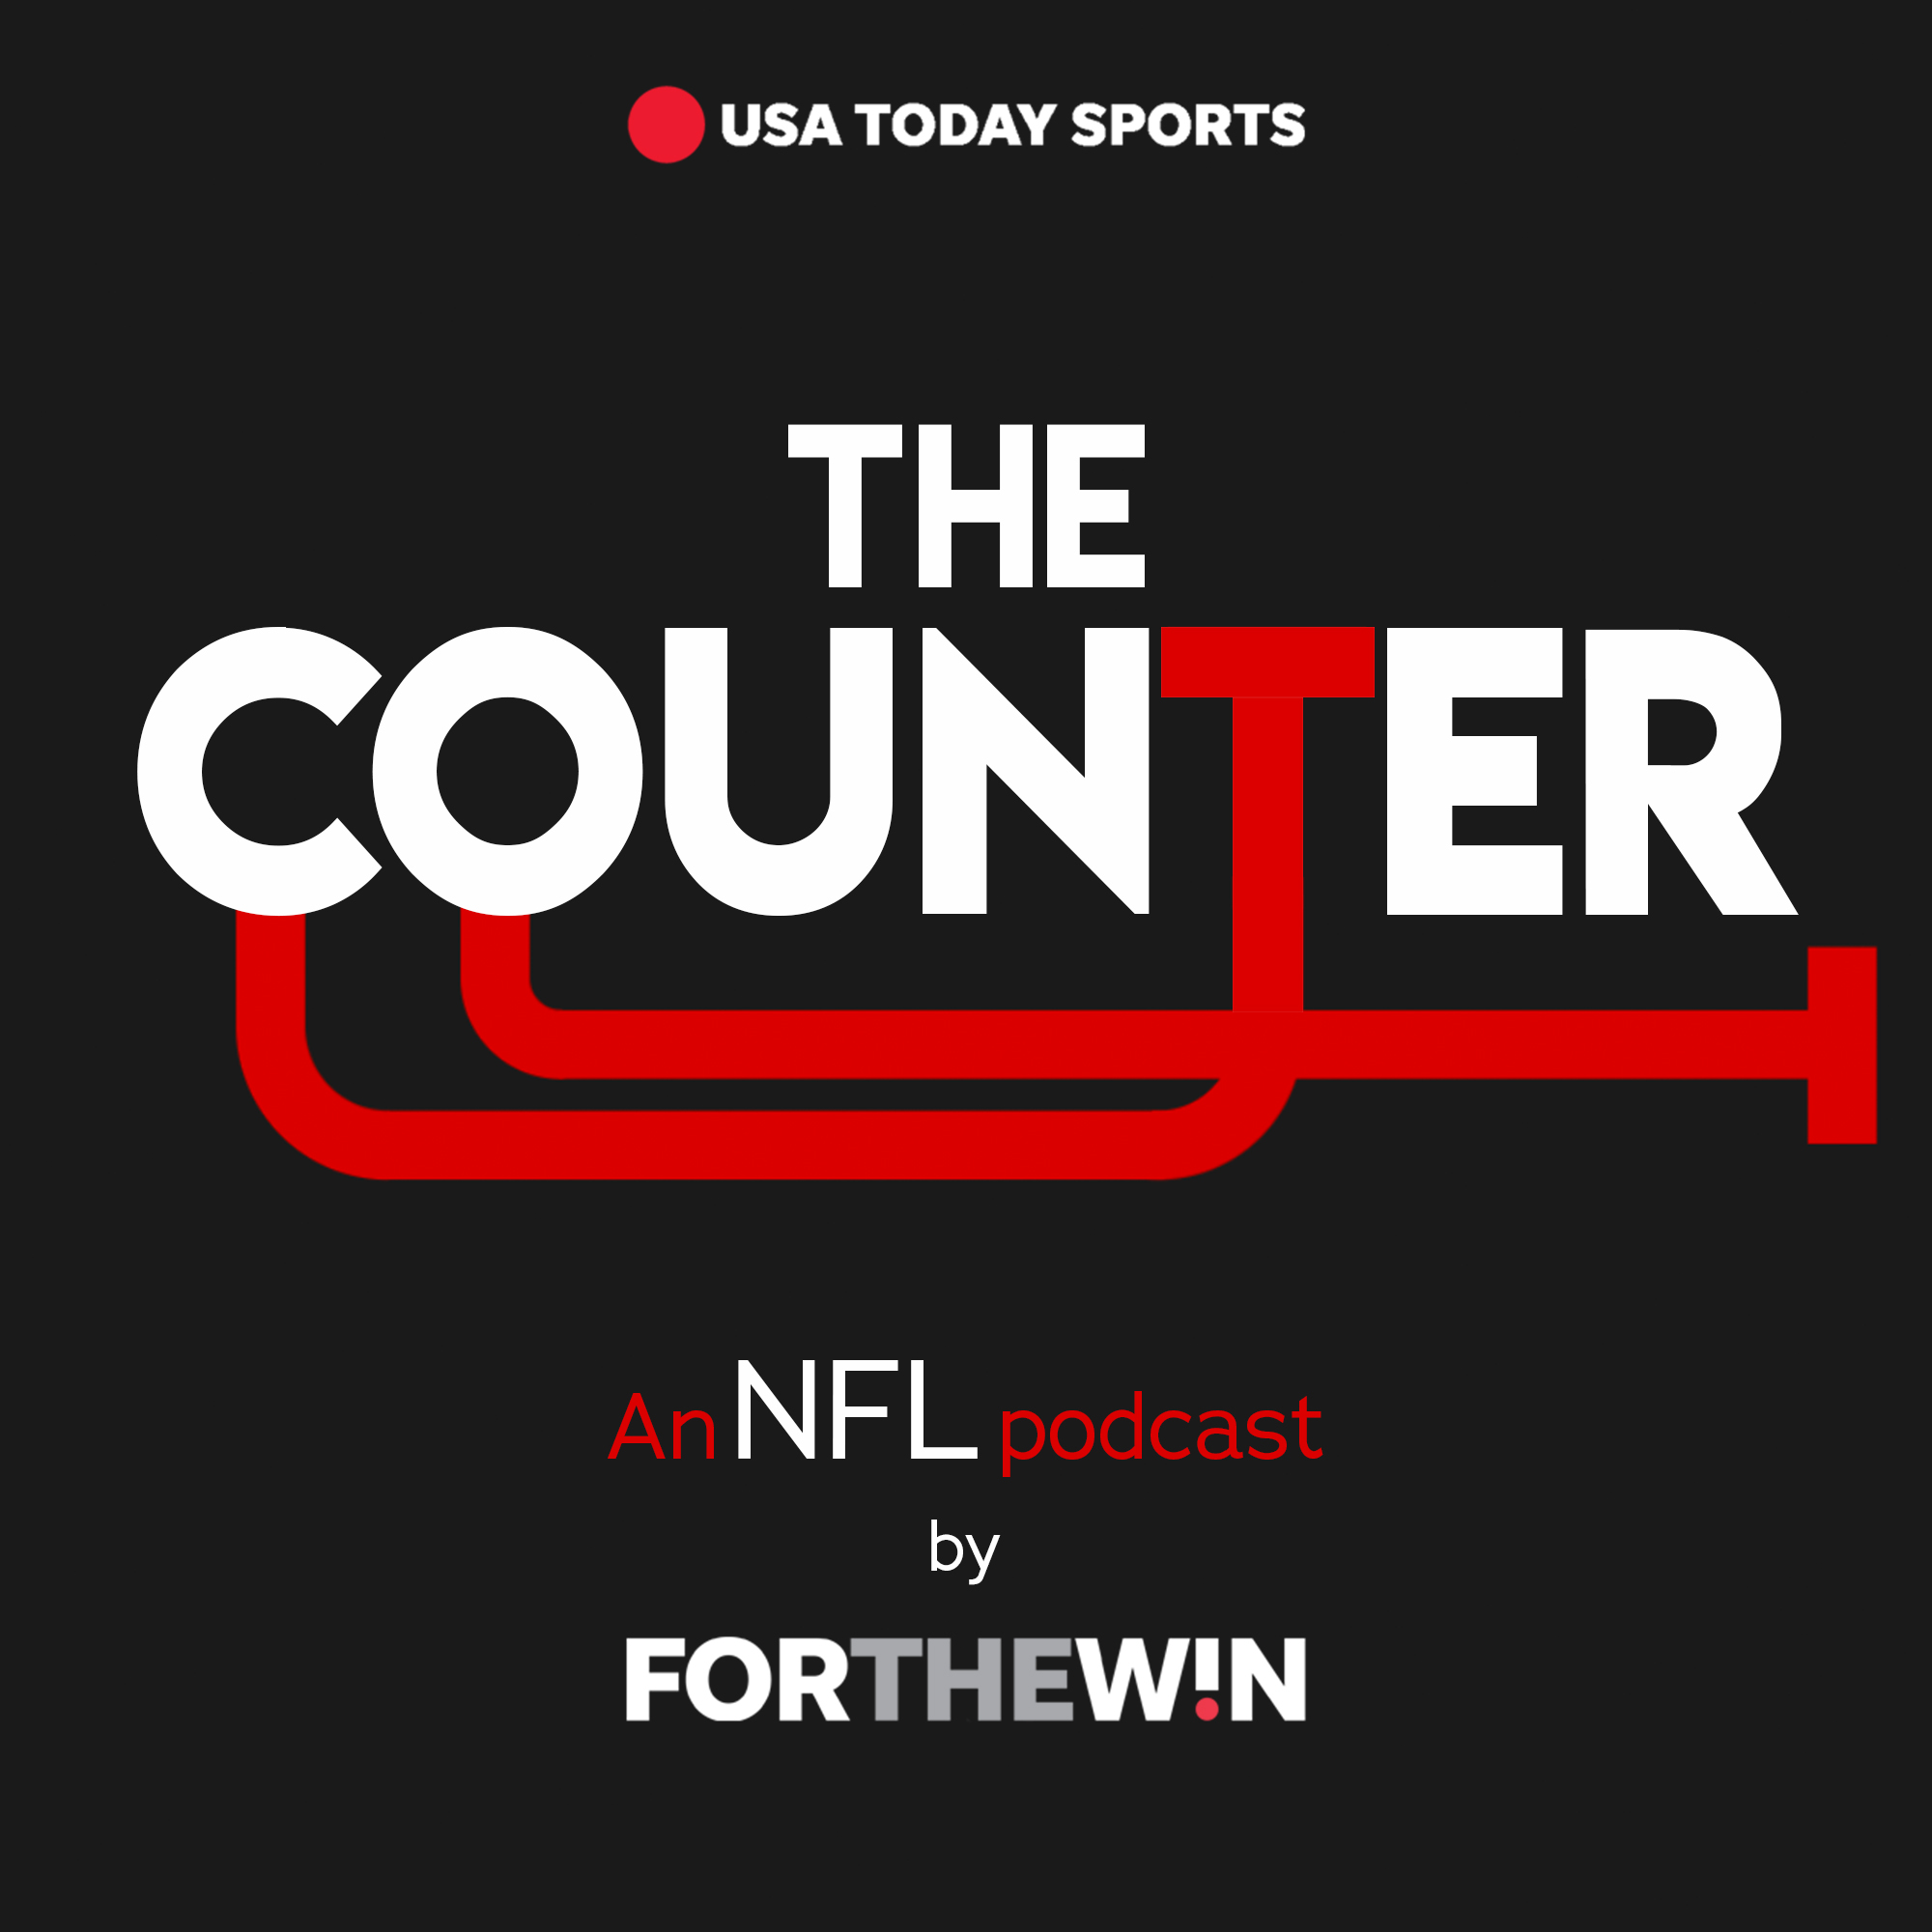 The Counter: An NFL Podcast by For The Win - Gruden, Watson and Week 9 picks against the spread!